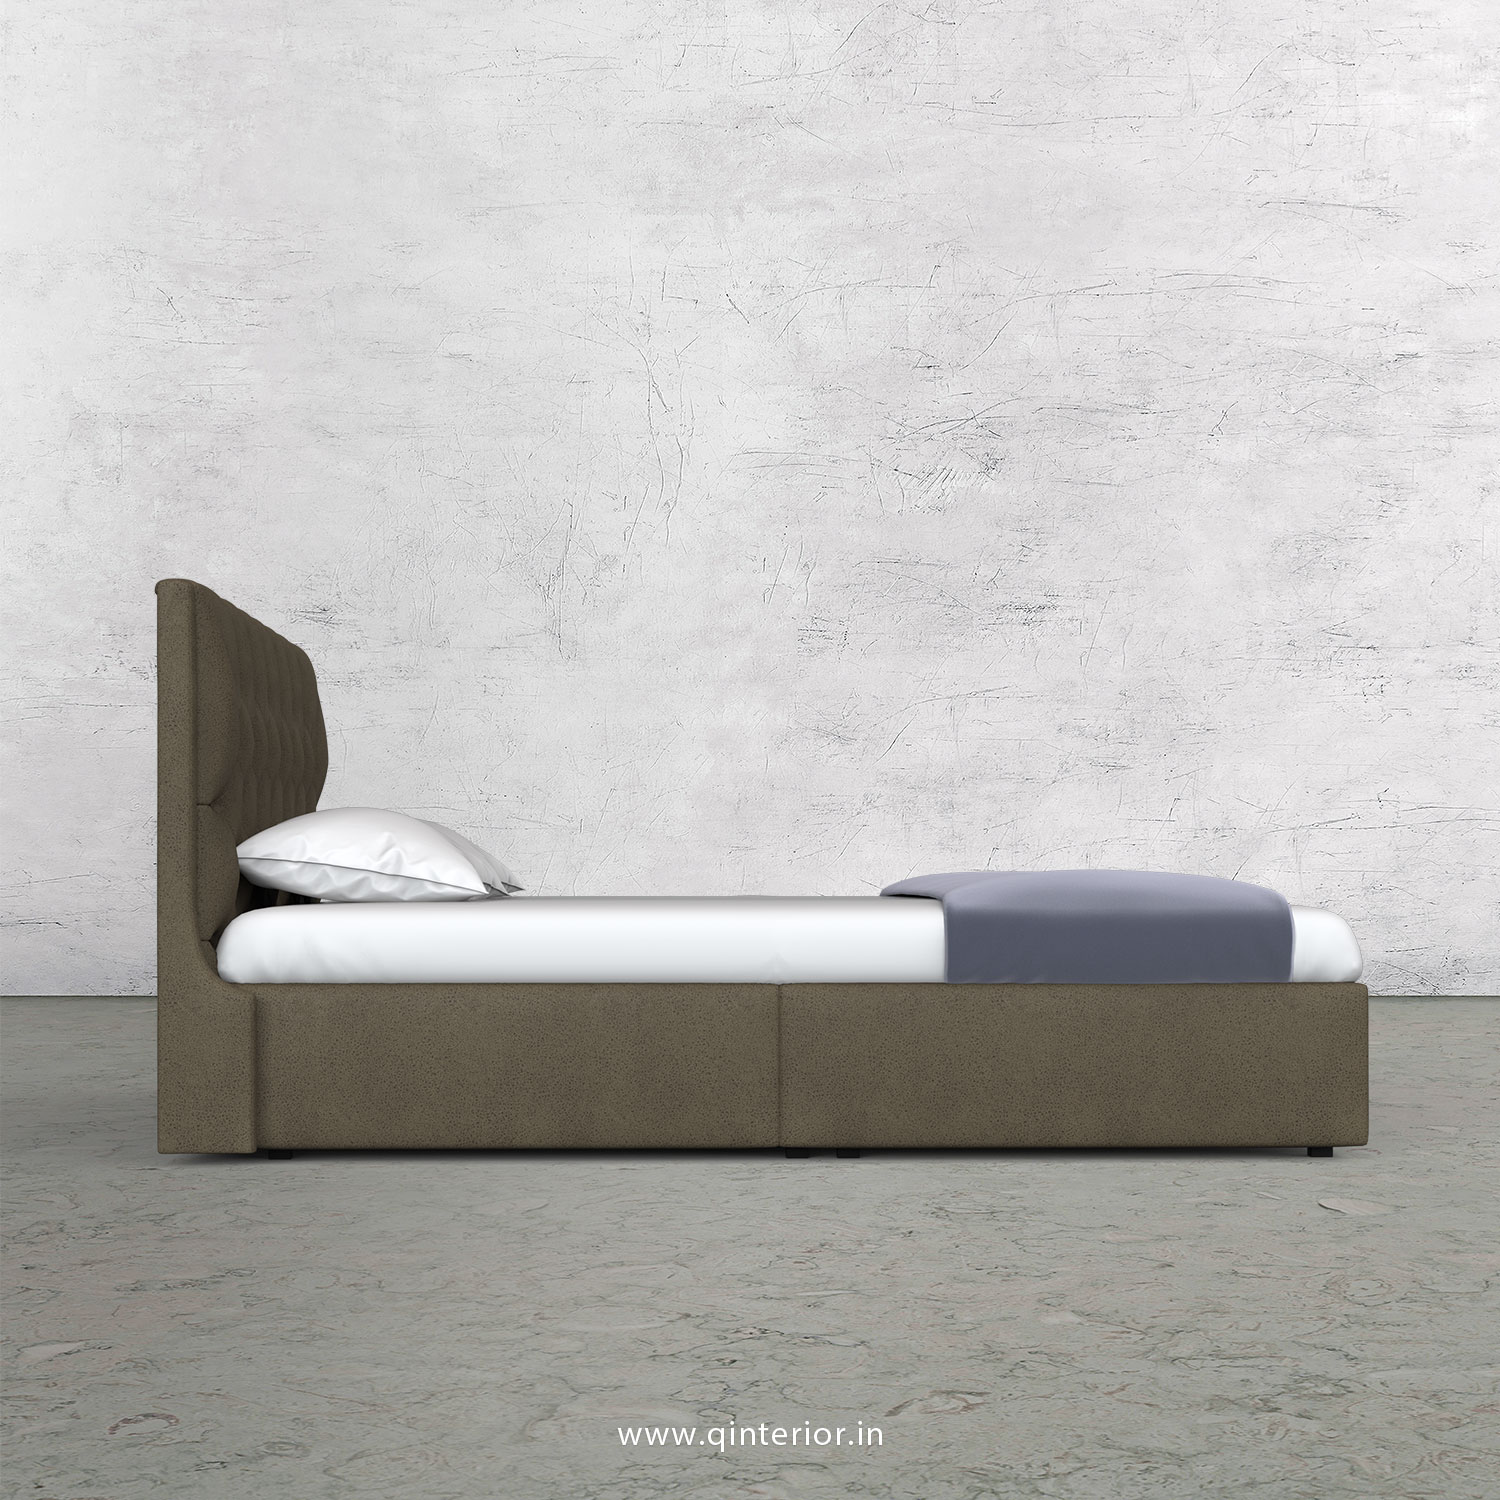 Scorpius Queen Bed in Fab Leather Fabric - QBD009 FL06